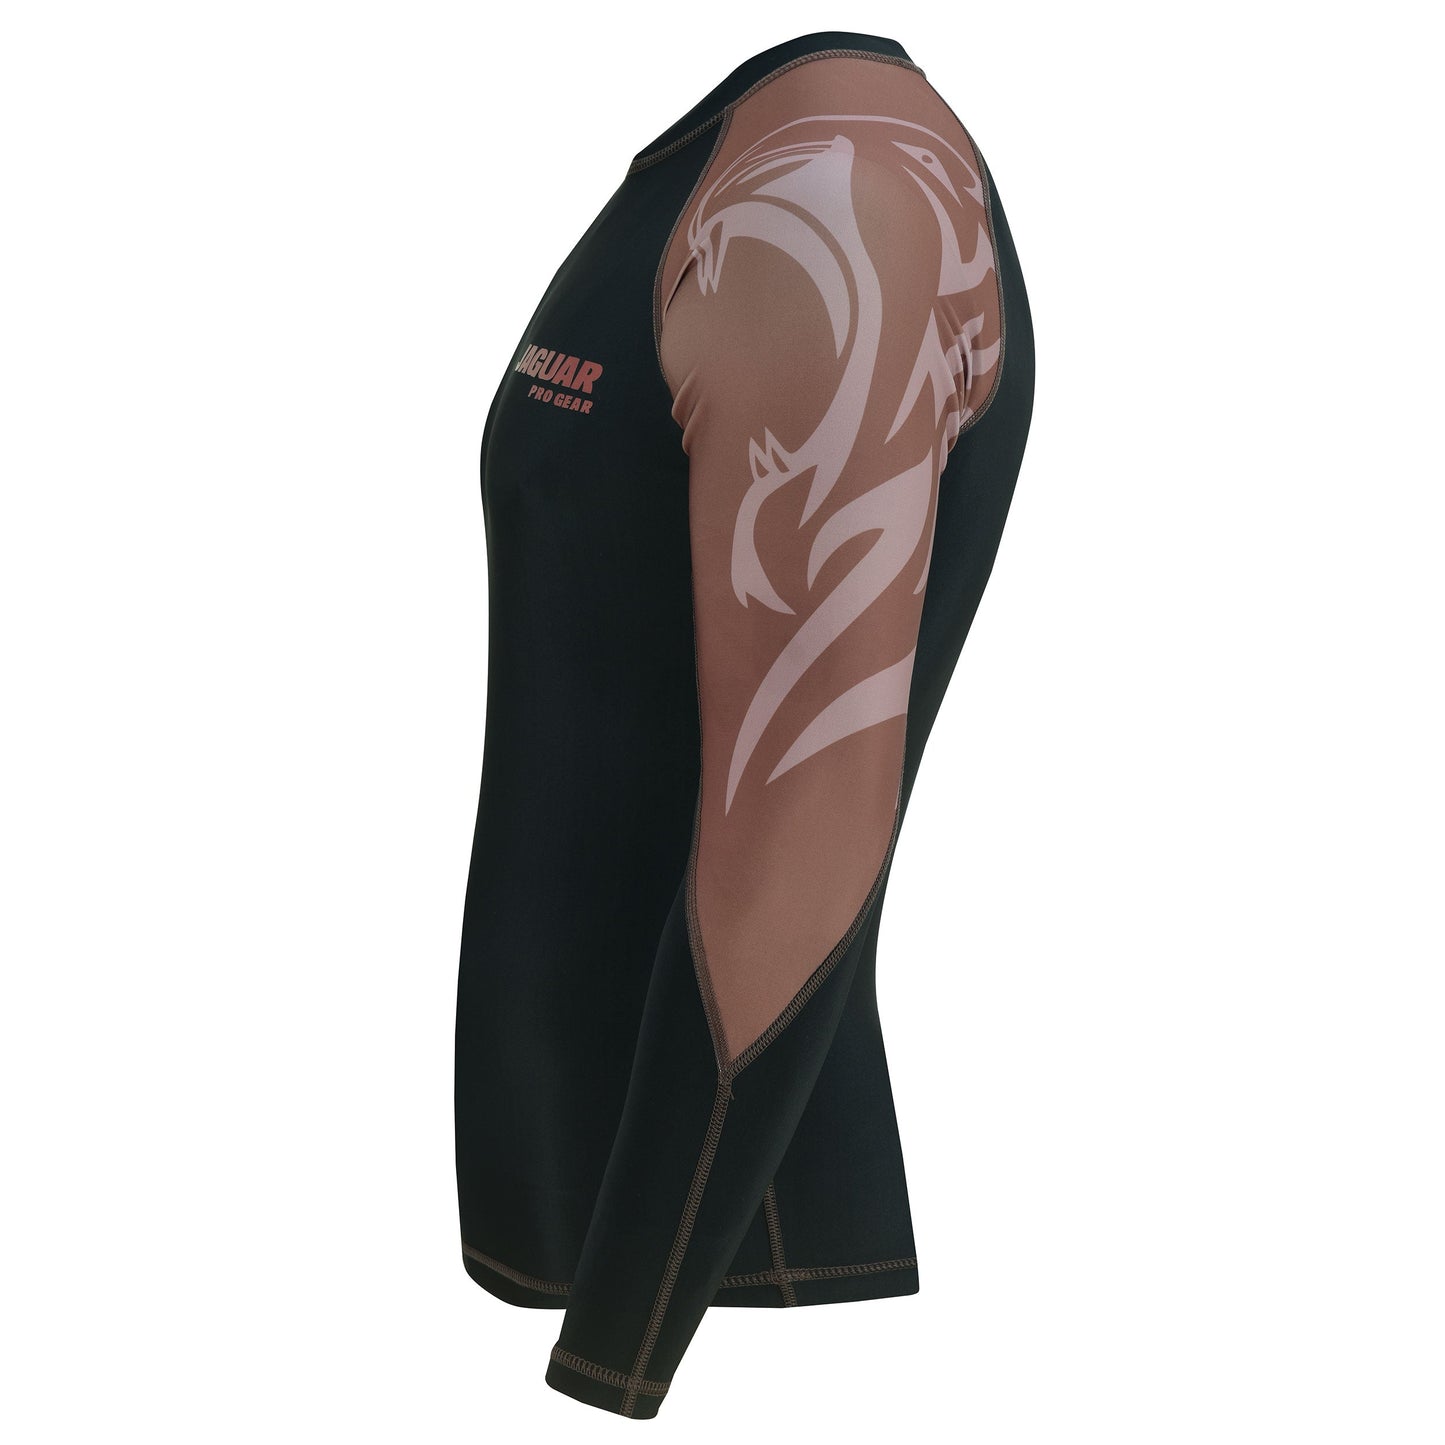 Jaguar Pro Gear - Elite MMA Ranked Rash Guard Sublimated Full Sleeves Inner Layer For Mixed Martial Arts